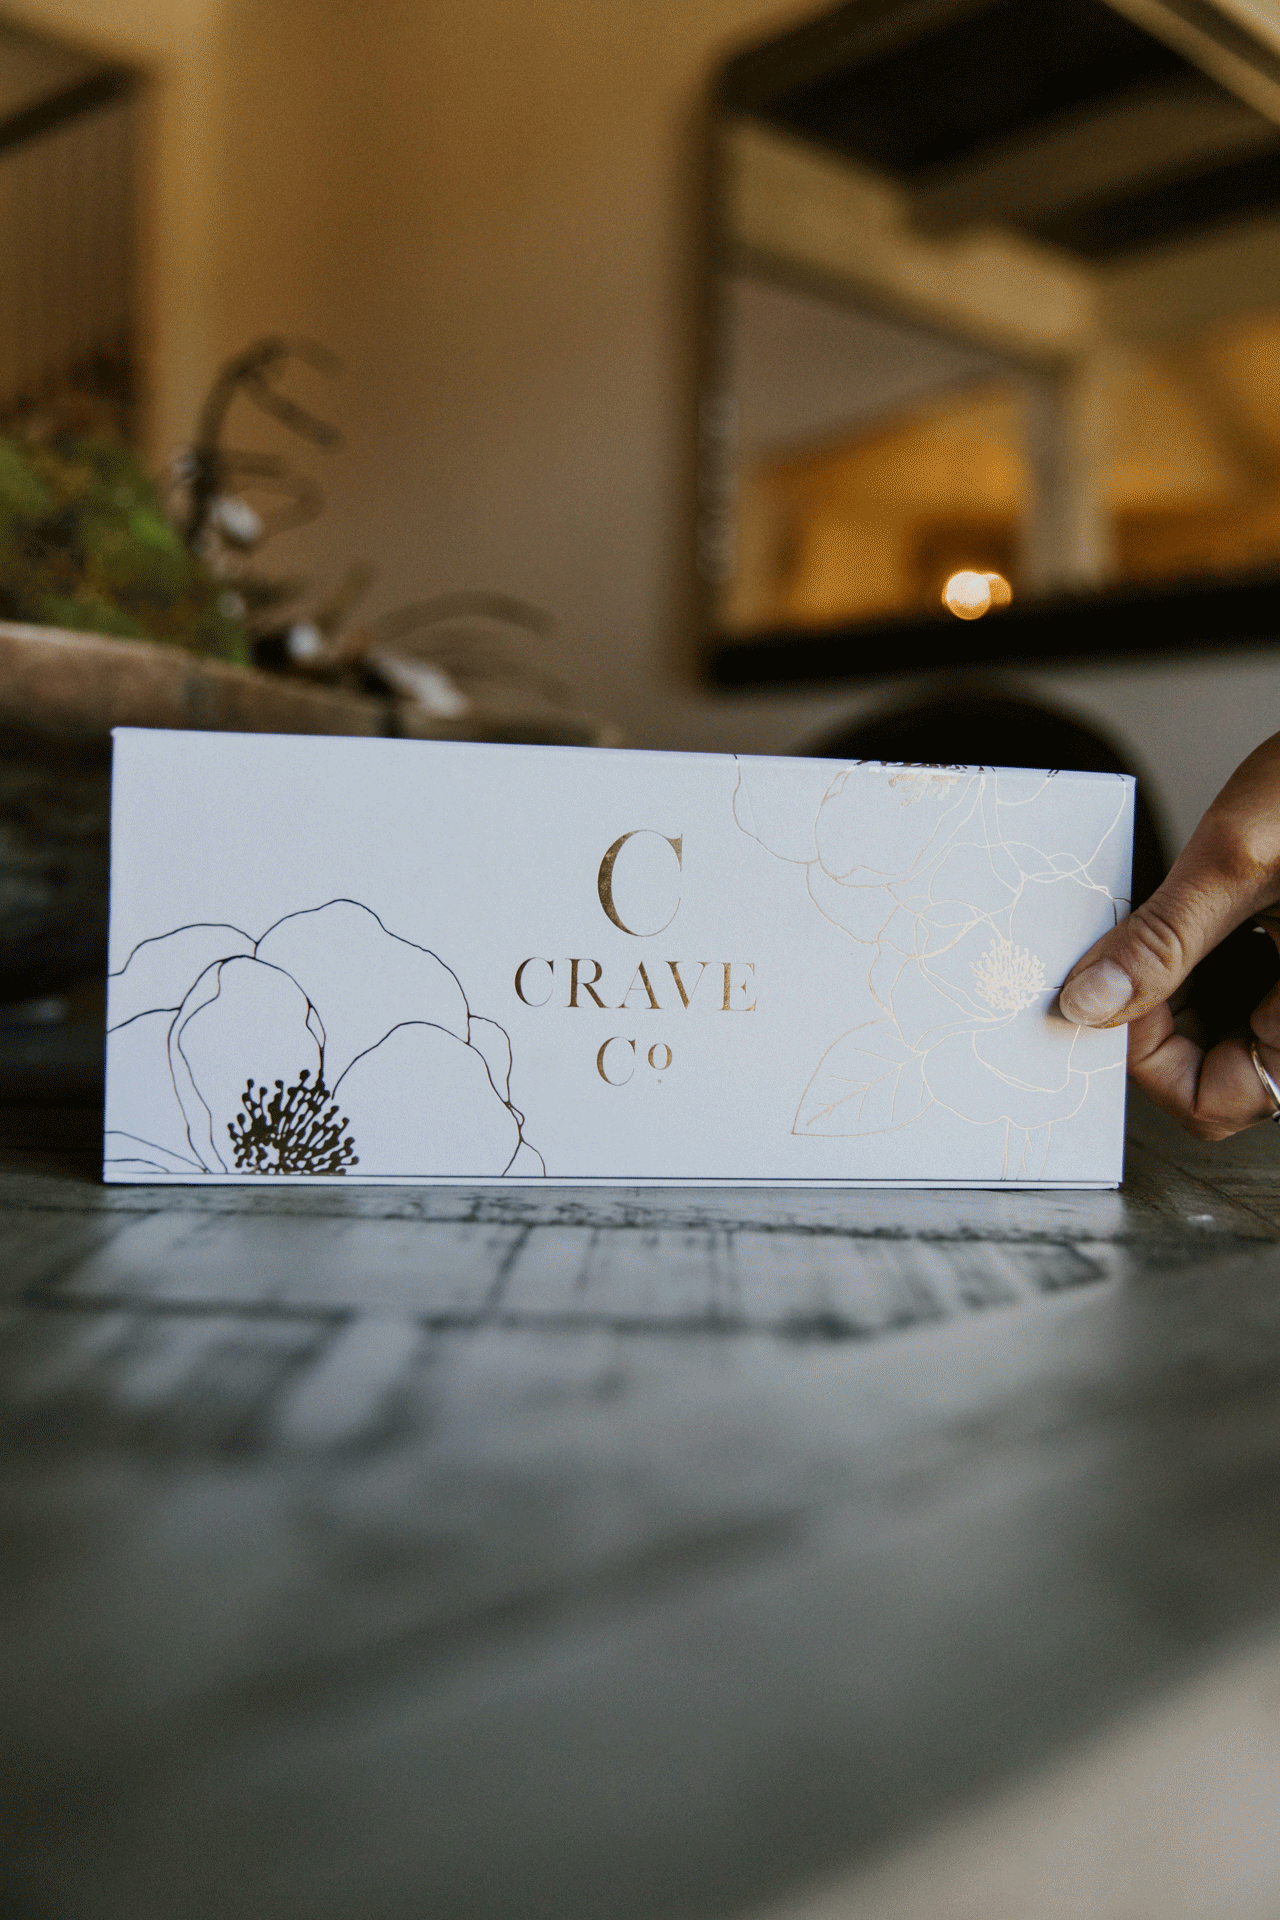 Crave Candles